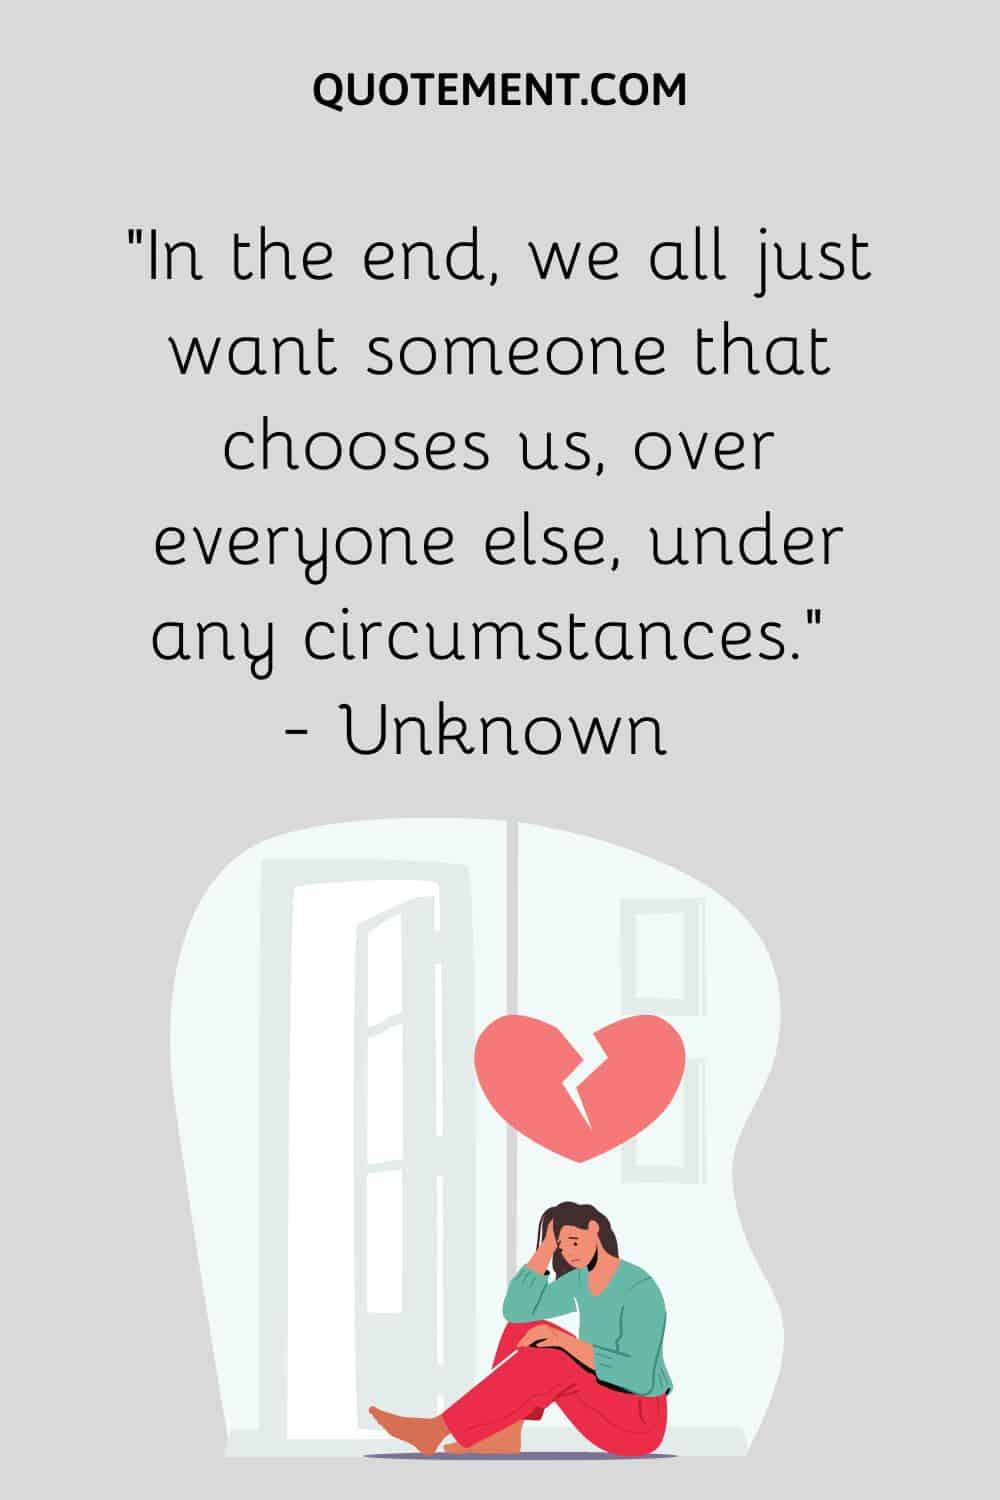 In the end, we all just want someone that chooses us, over everyone else, under any circumstances.